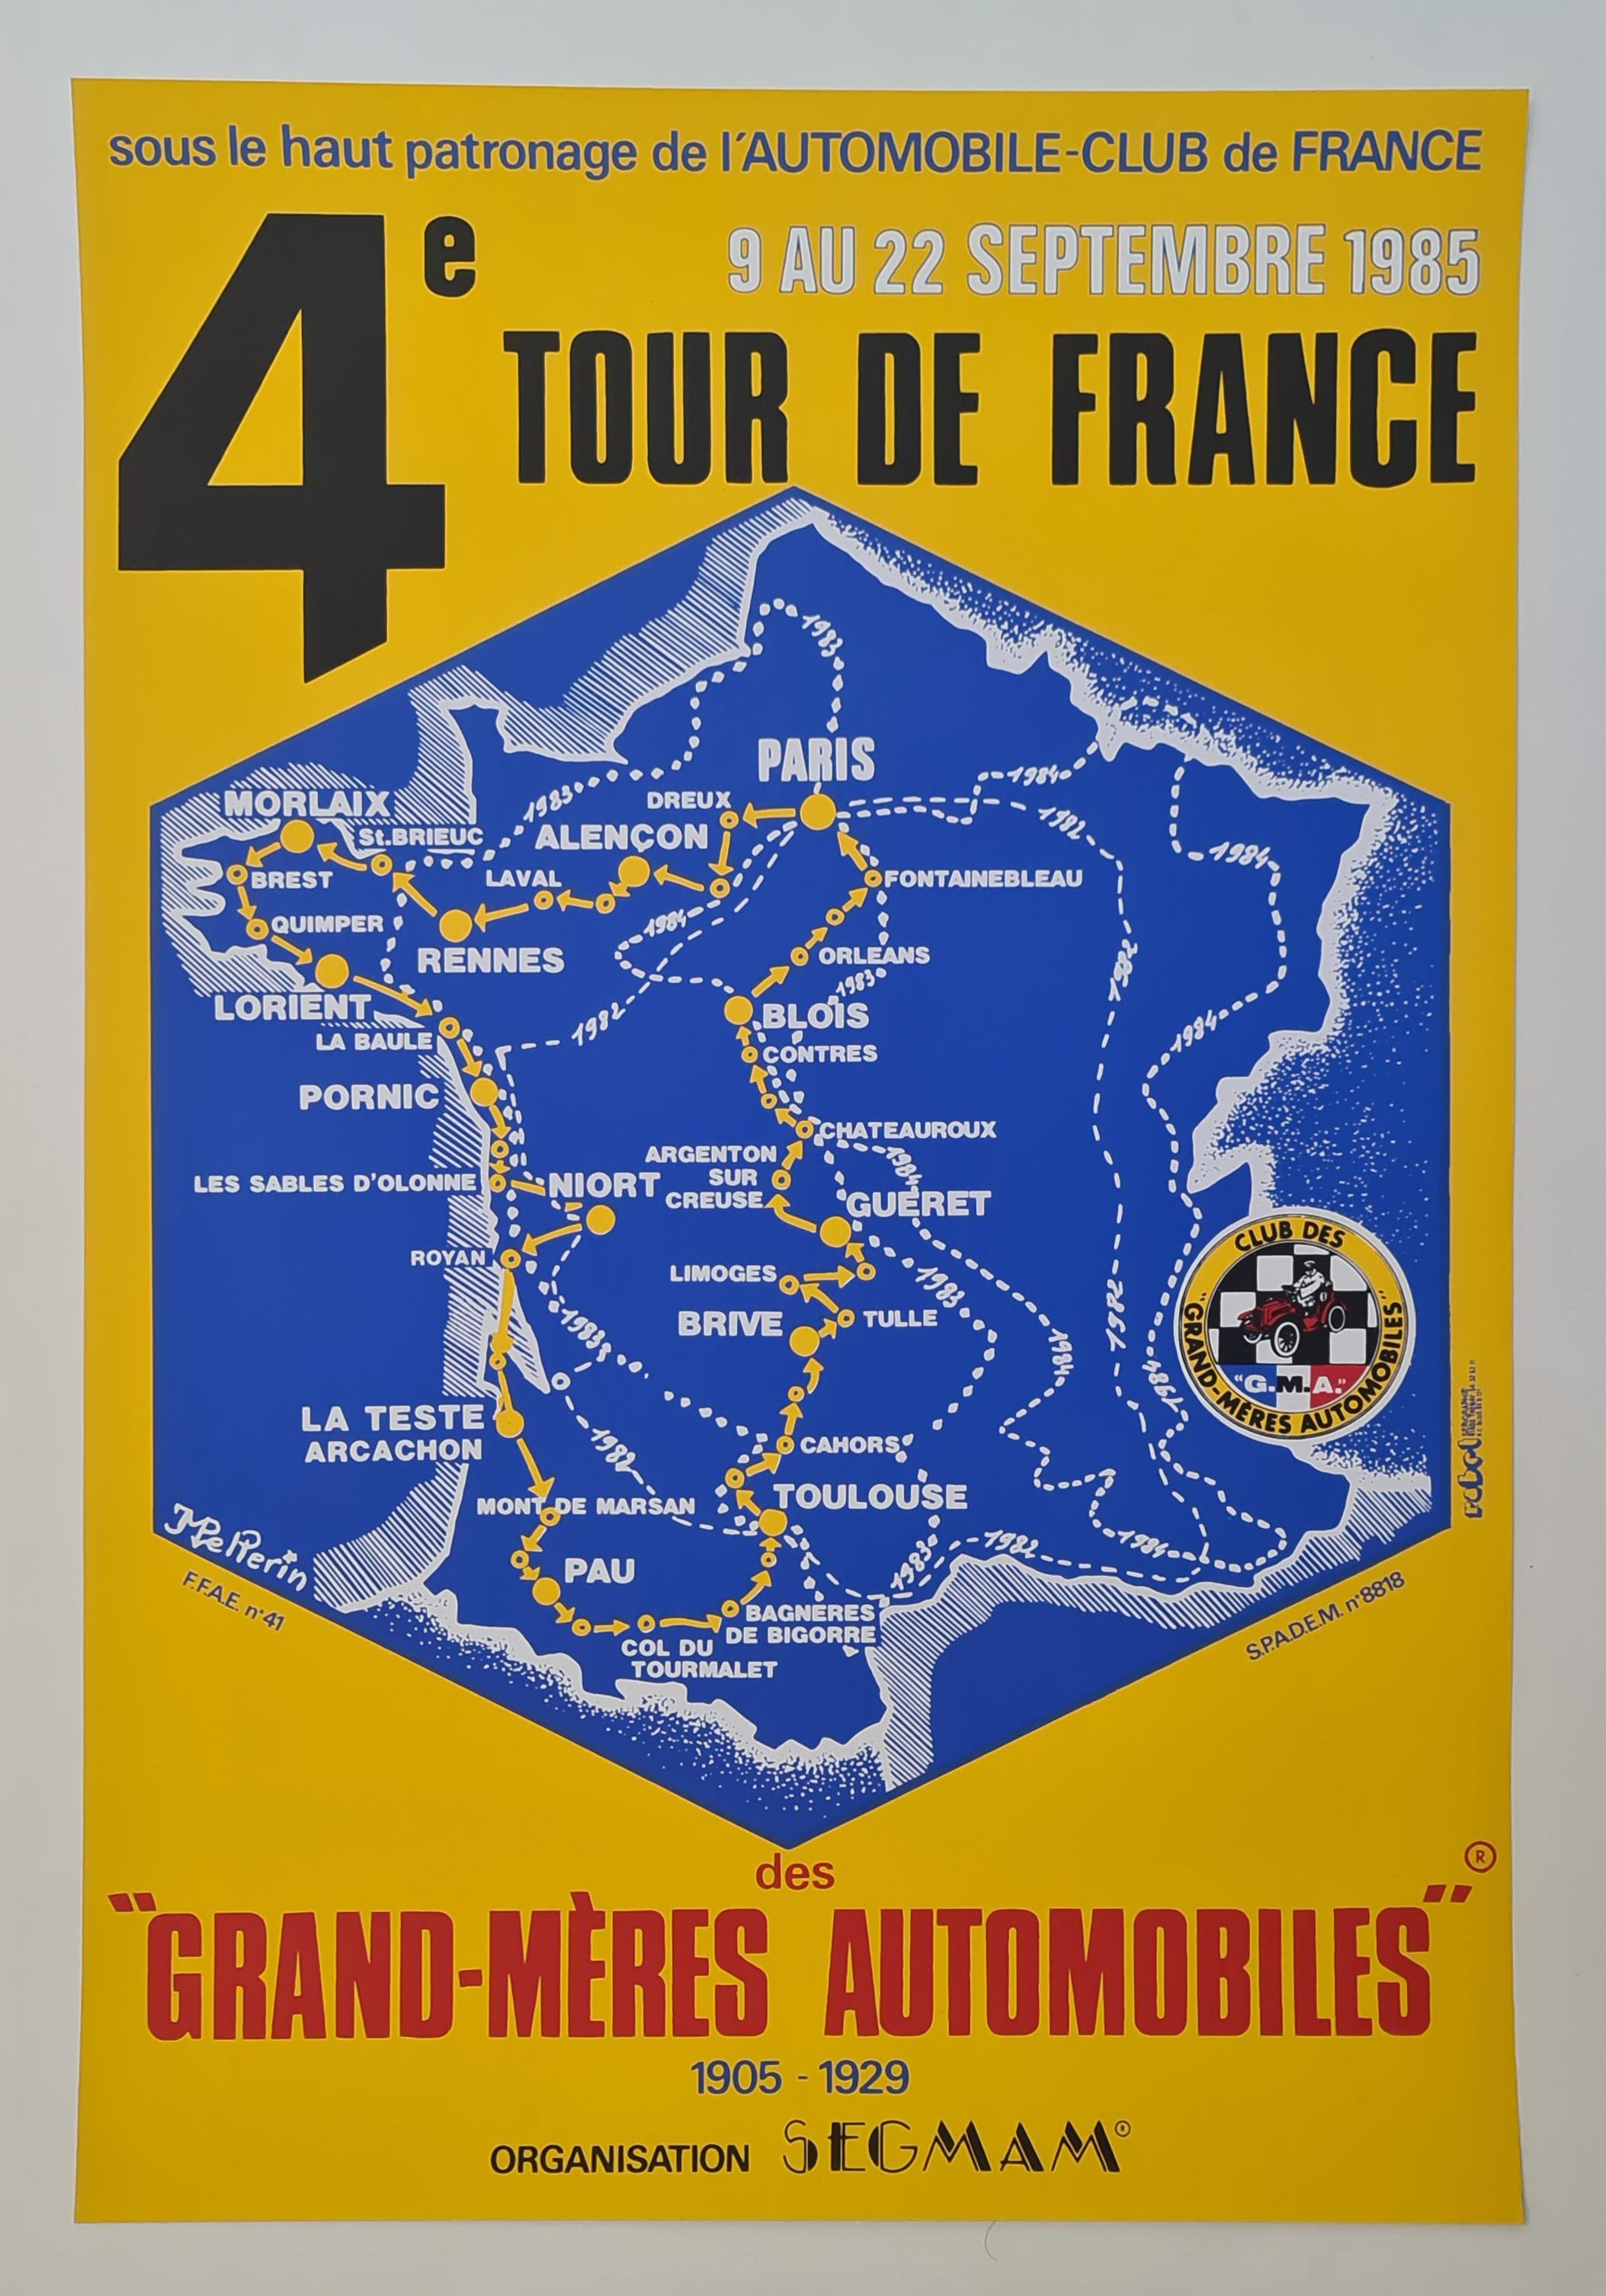 Original poster to promote the 4th Tour de France of the Grand-mères automobiles For Sale 1